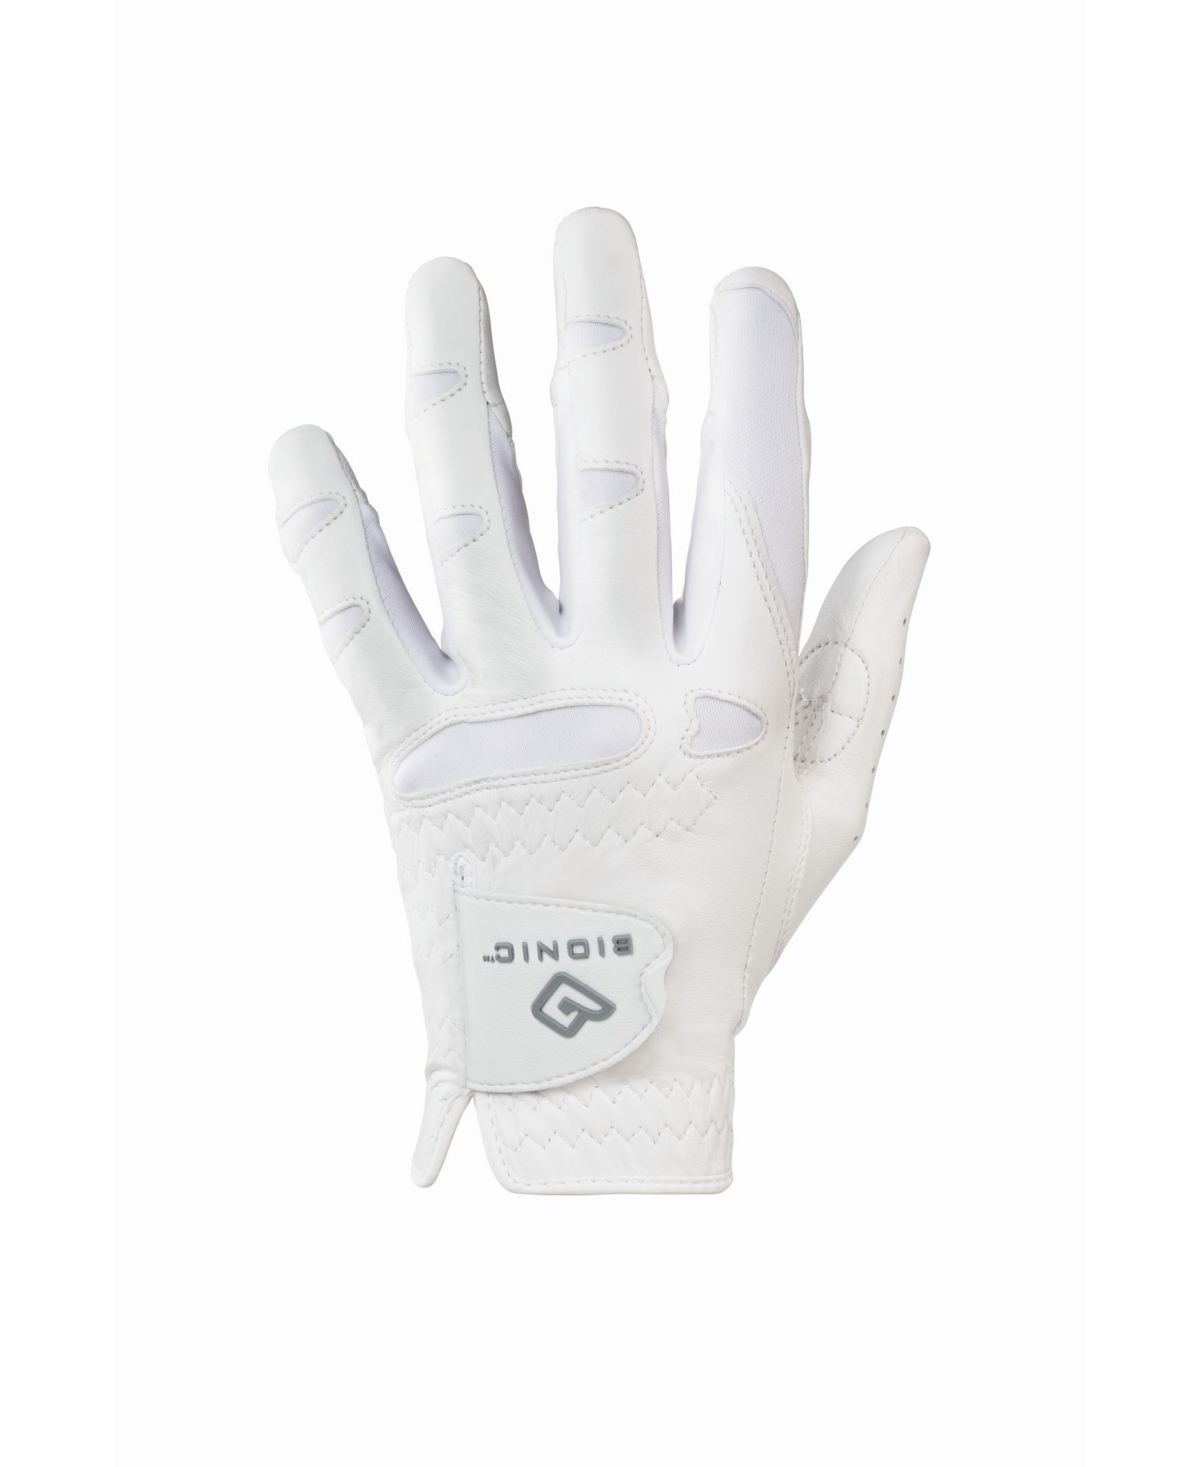 Save 42% on Women's Natural Fit Golf Glove - Right Hand